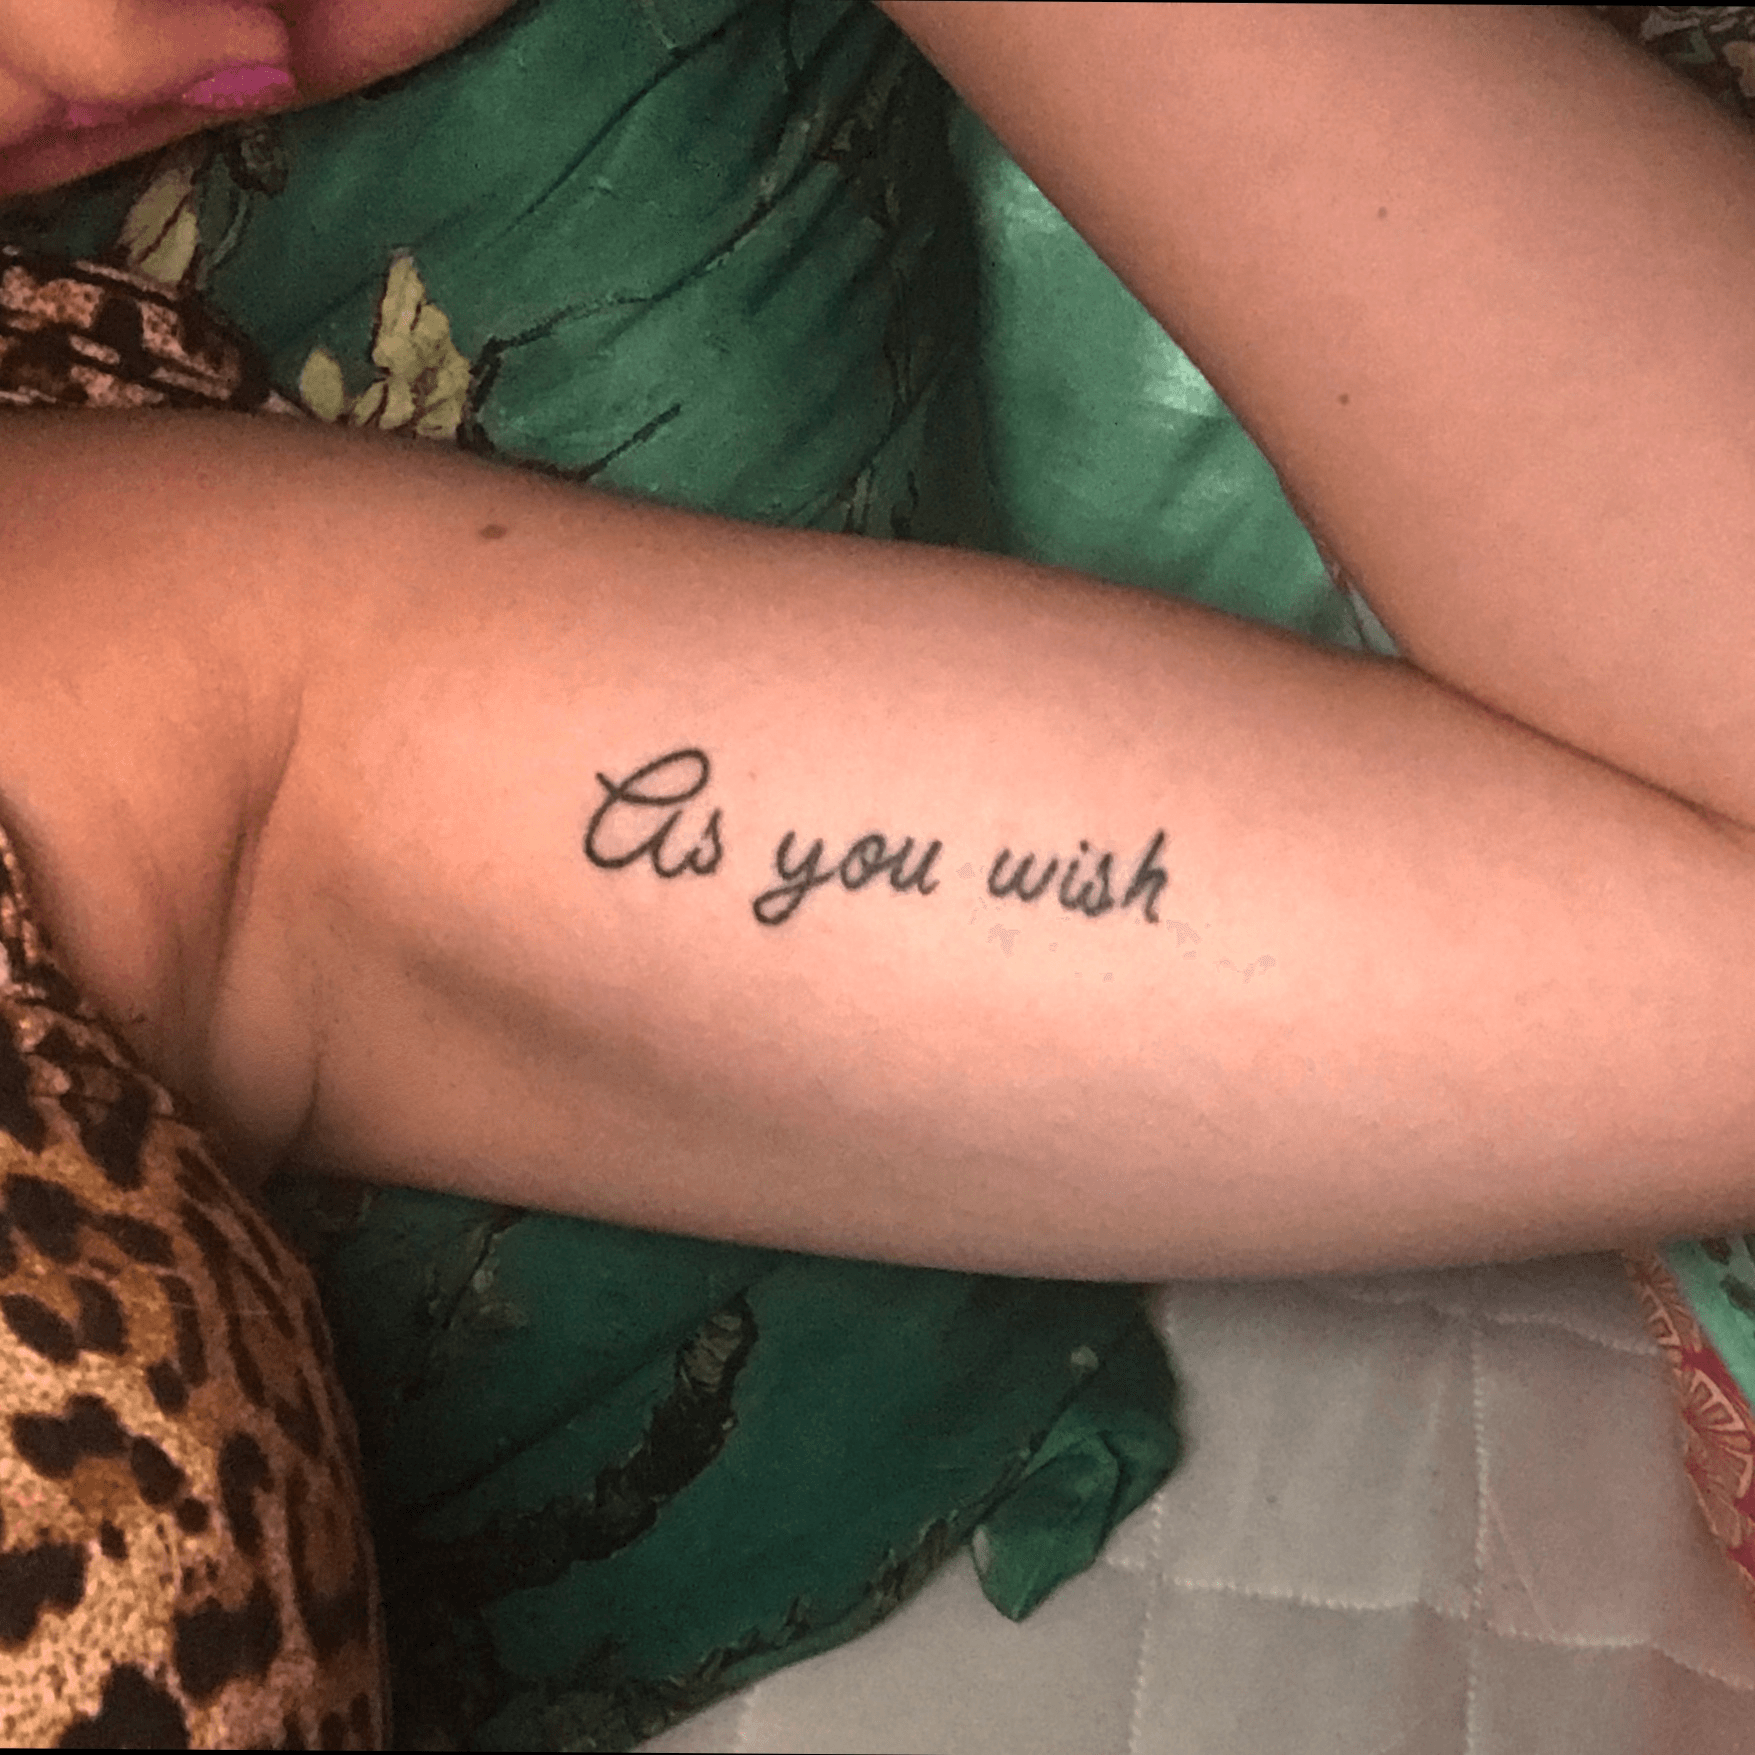 Tattoo uploaded by Rhiannon Villwock • Matching tattoo I got with my mom.  Quote from the Princess Bride, “As you wish”. We used to watch that movie a  lot together, I am